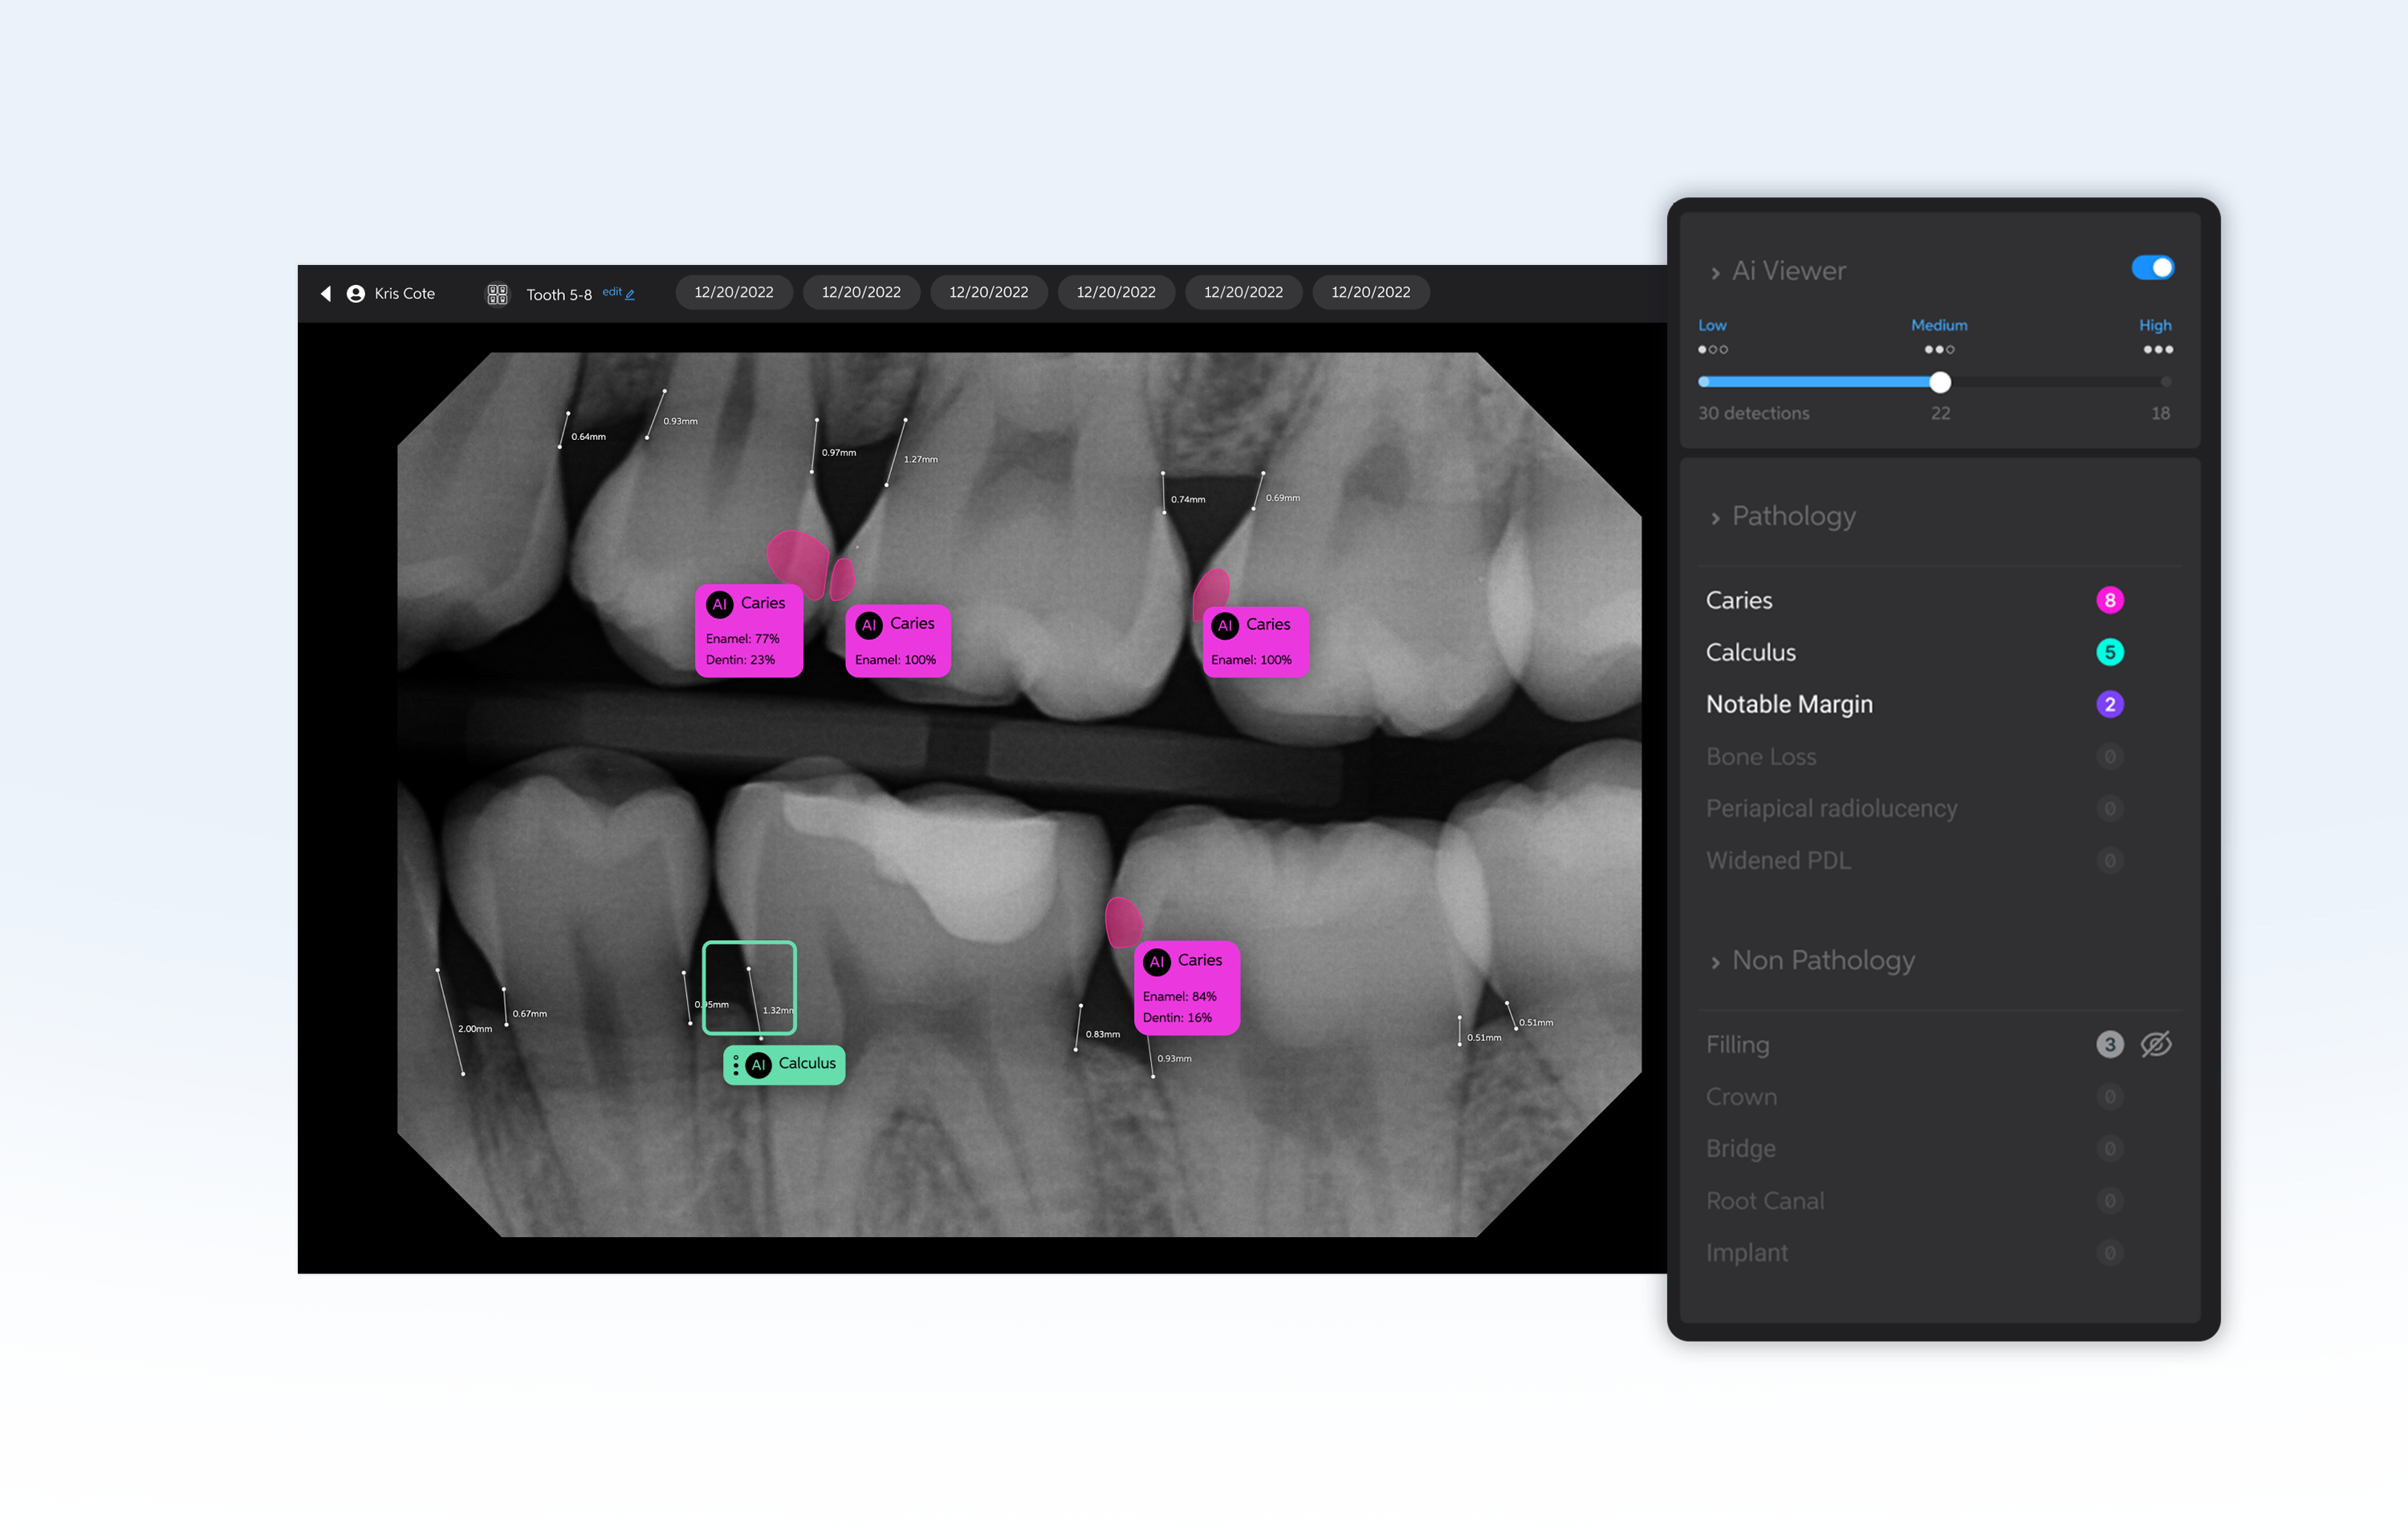 Pearl's Second Opinion real-time dental AI software provides an industry-leading range of FDA-cleared detection capabilities.